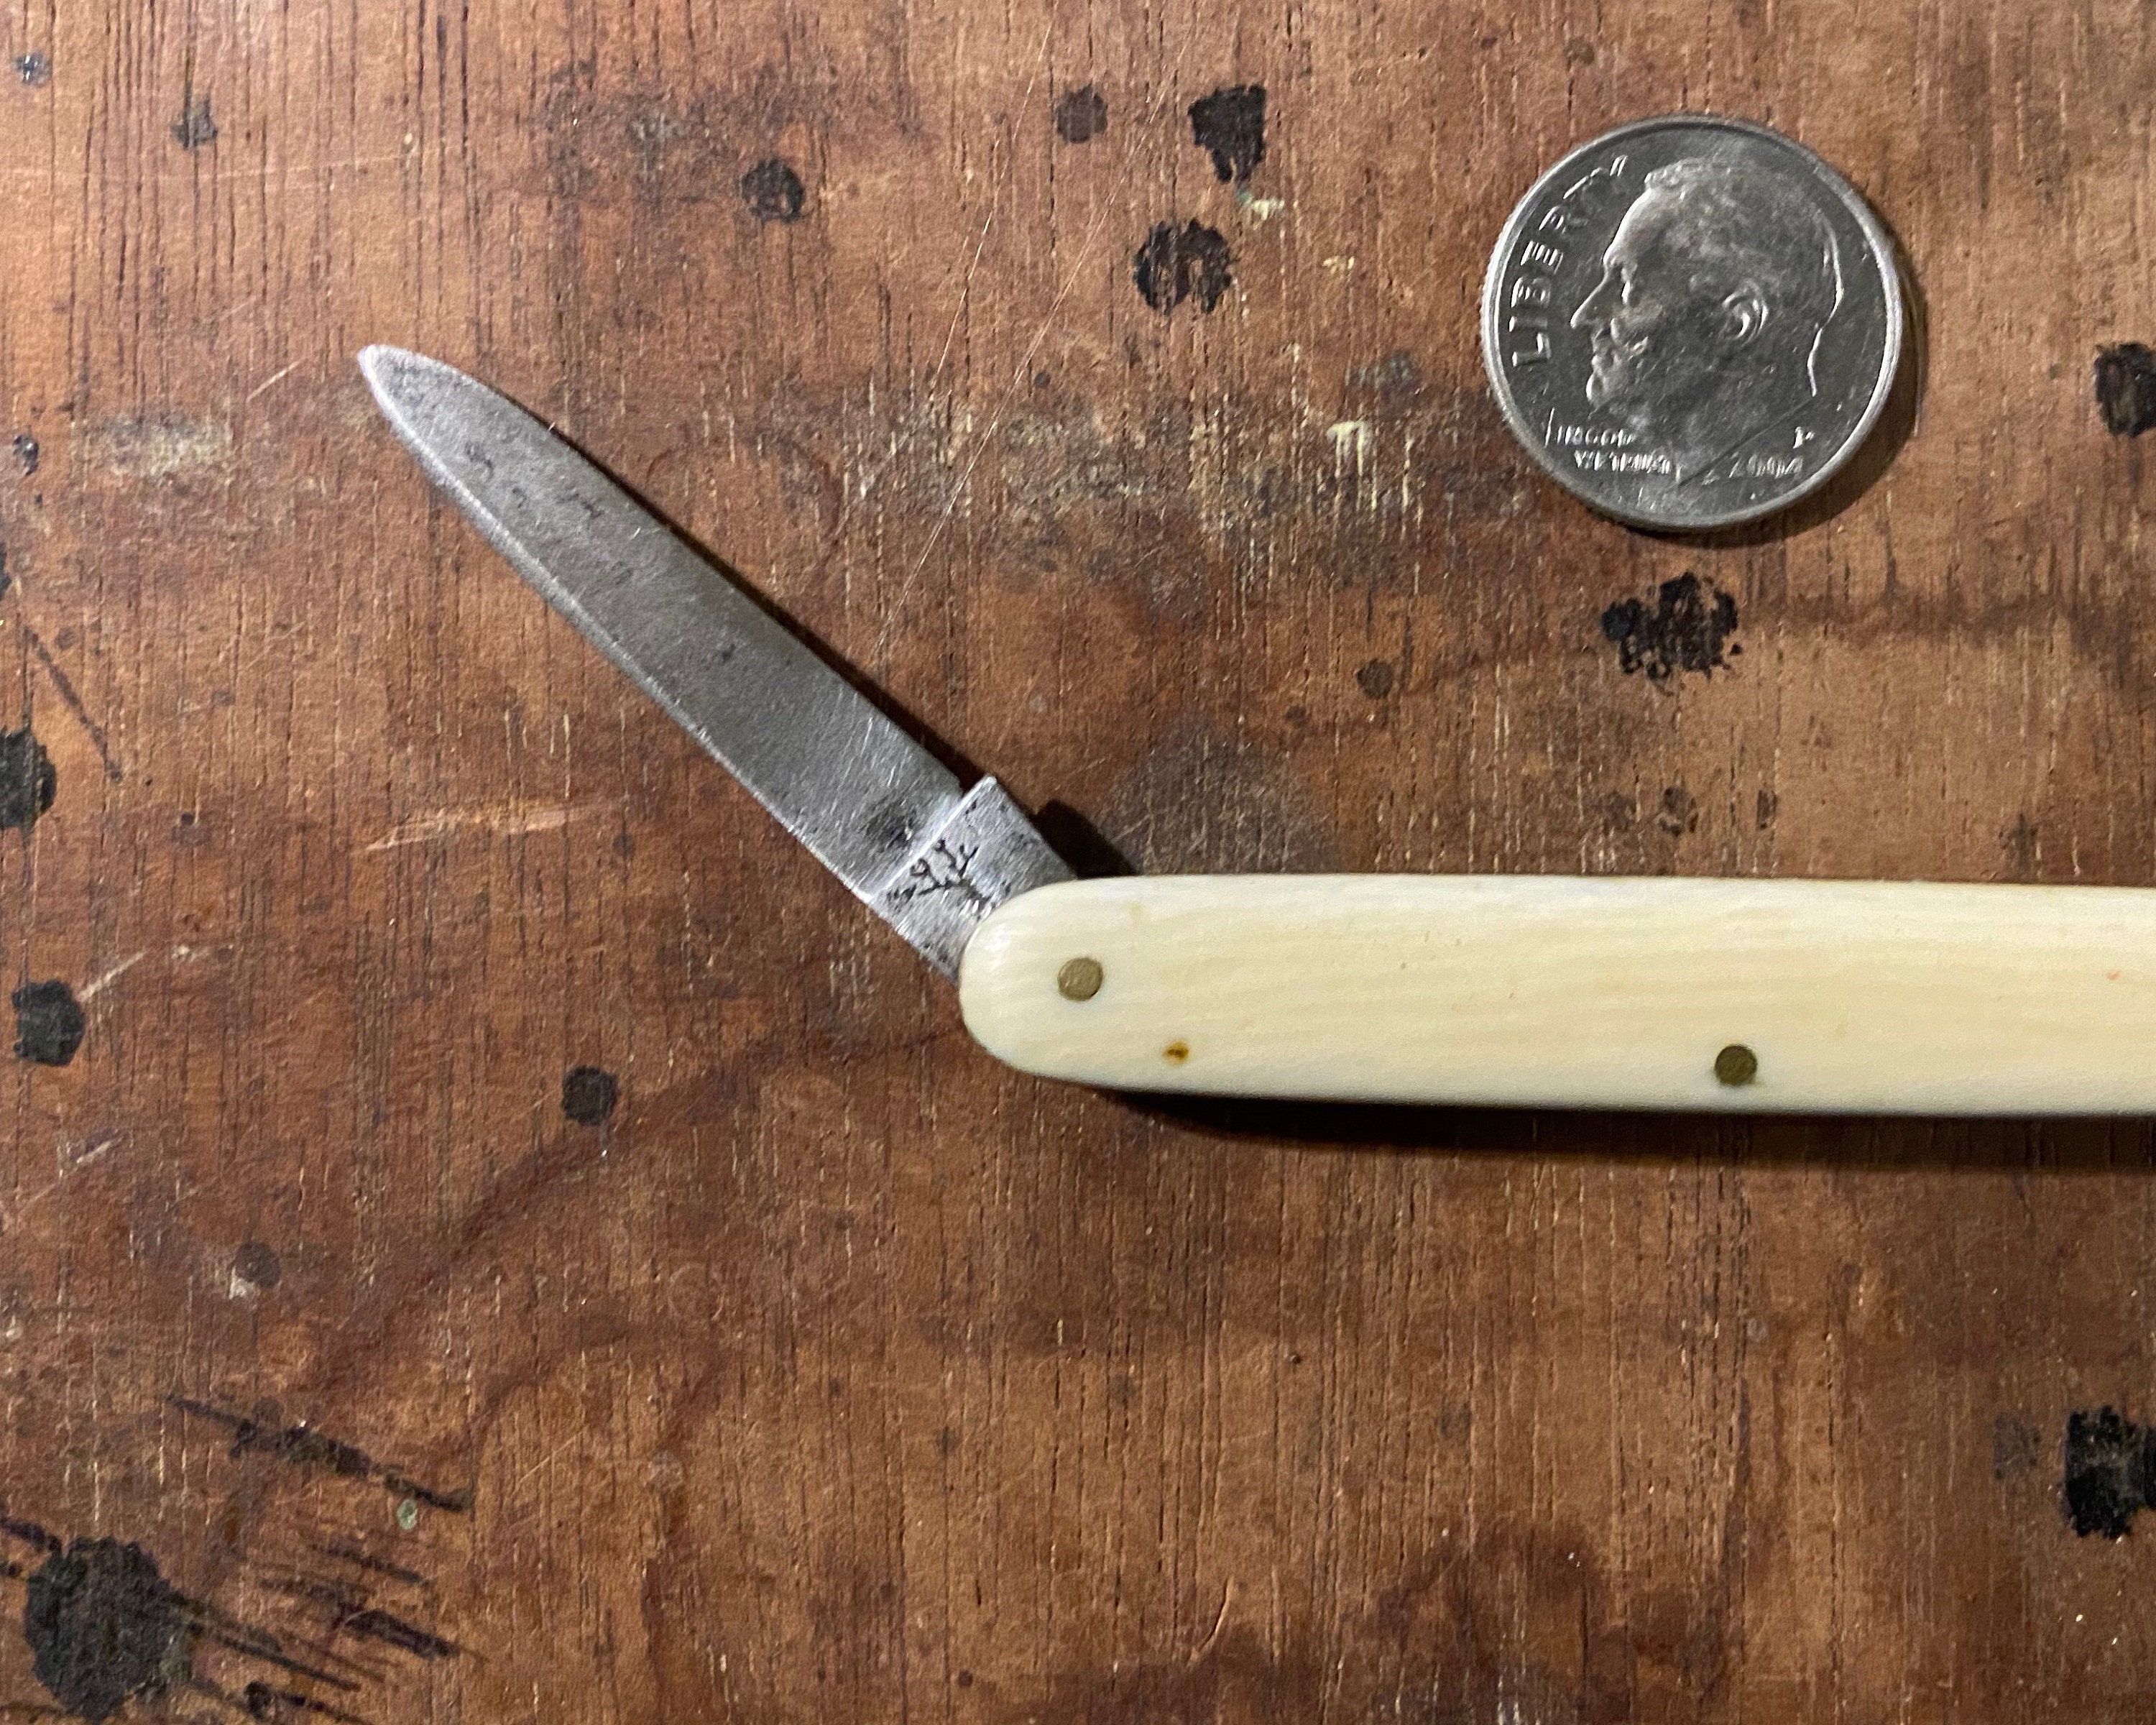 Antique Pocket Knife Vintage H. Bokers's Improved Cutlery Tree Brand Knife  Folding Double Knife Old Fashioned Rare Pocket Knife Small Early -   Canada